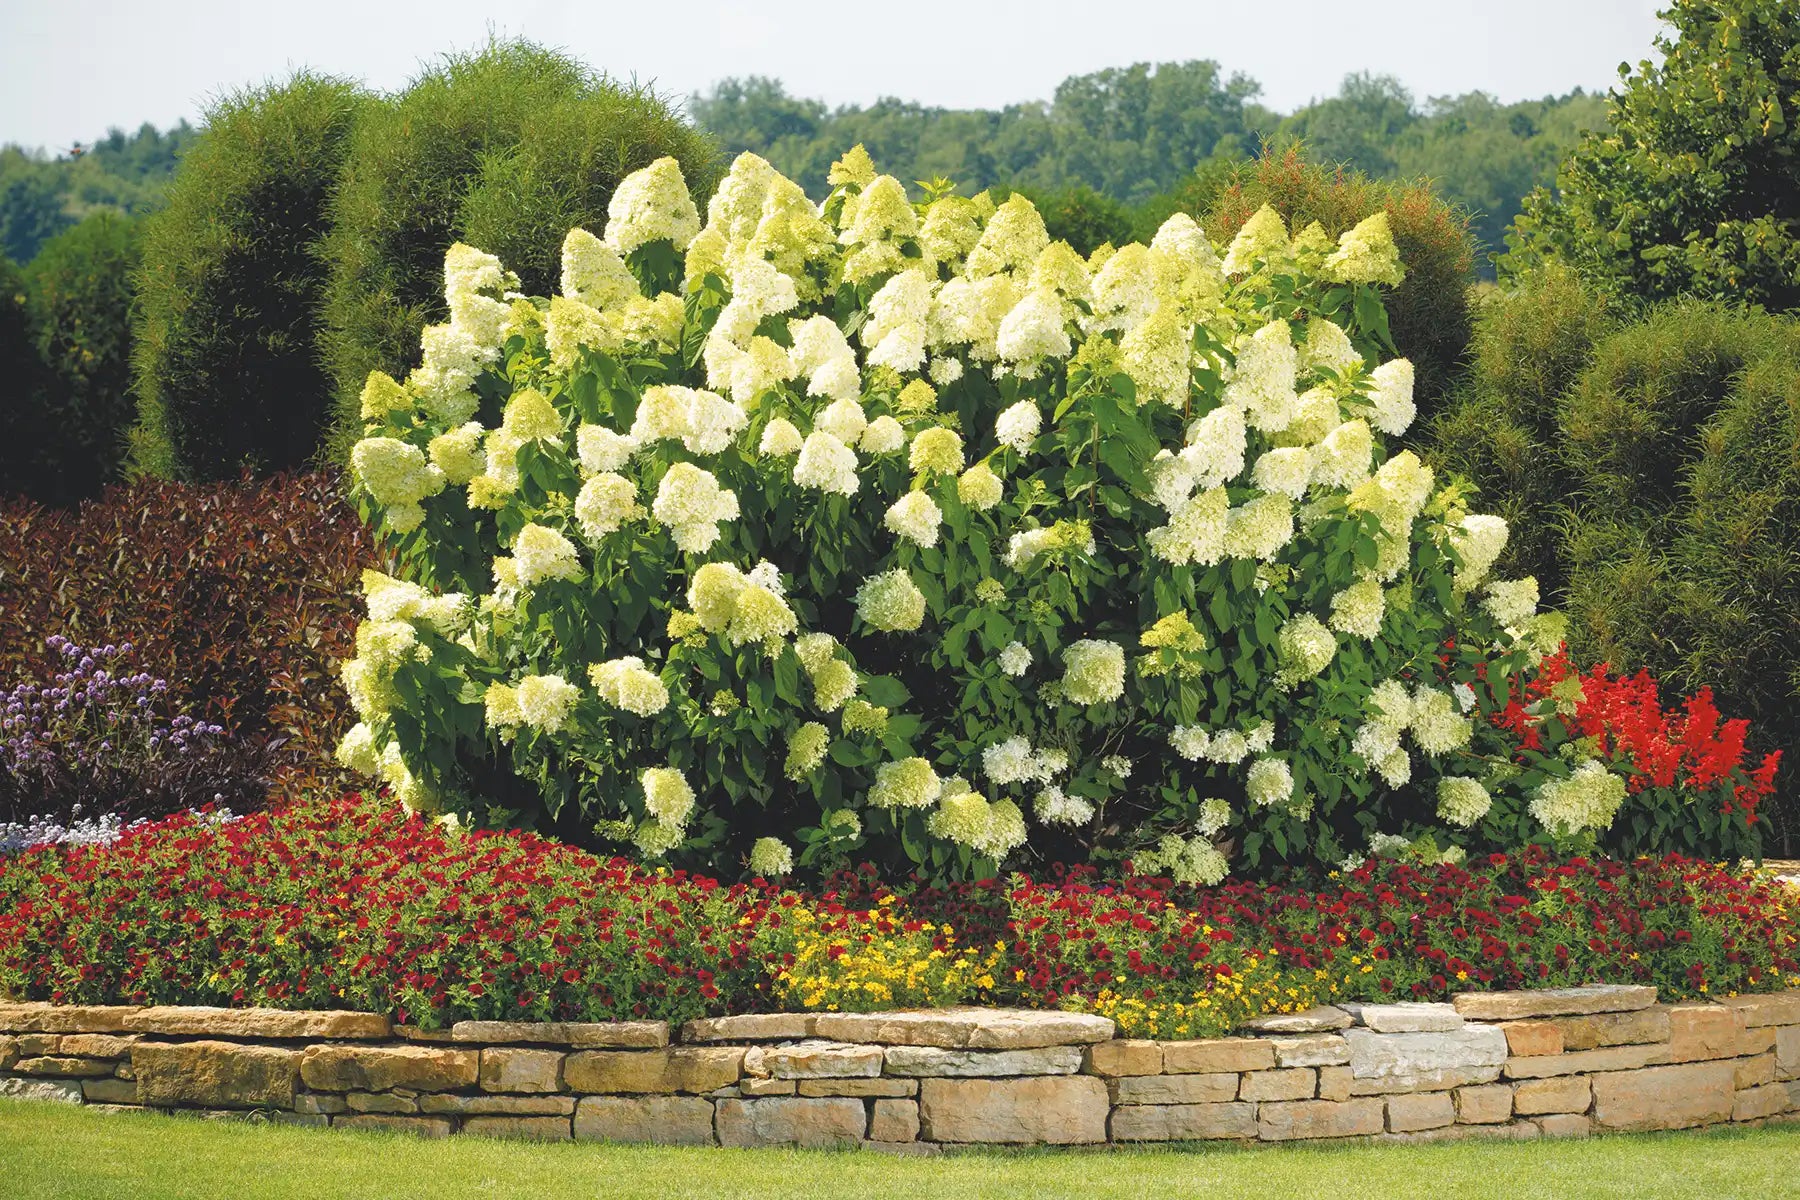 Proven Winners® Limelight® Hydrangea is the centerpiece of a lovely stone wall garden parimeter that contains striking multicolored flowers surrounding the hydrangeas with a backup of tall evergreen trees.